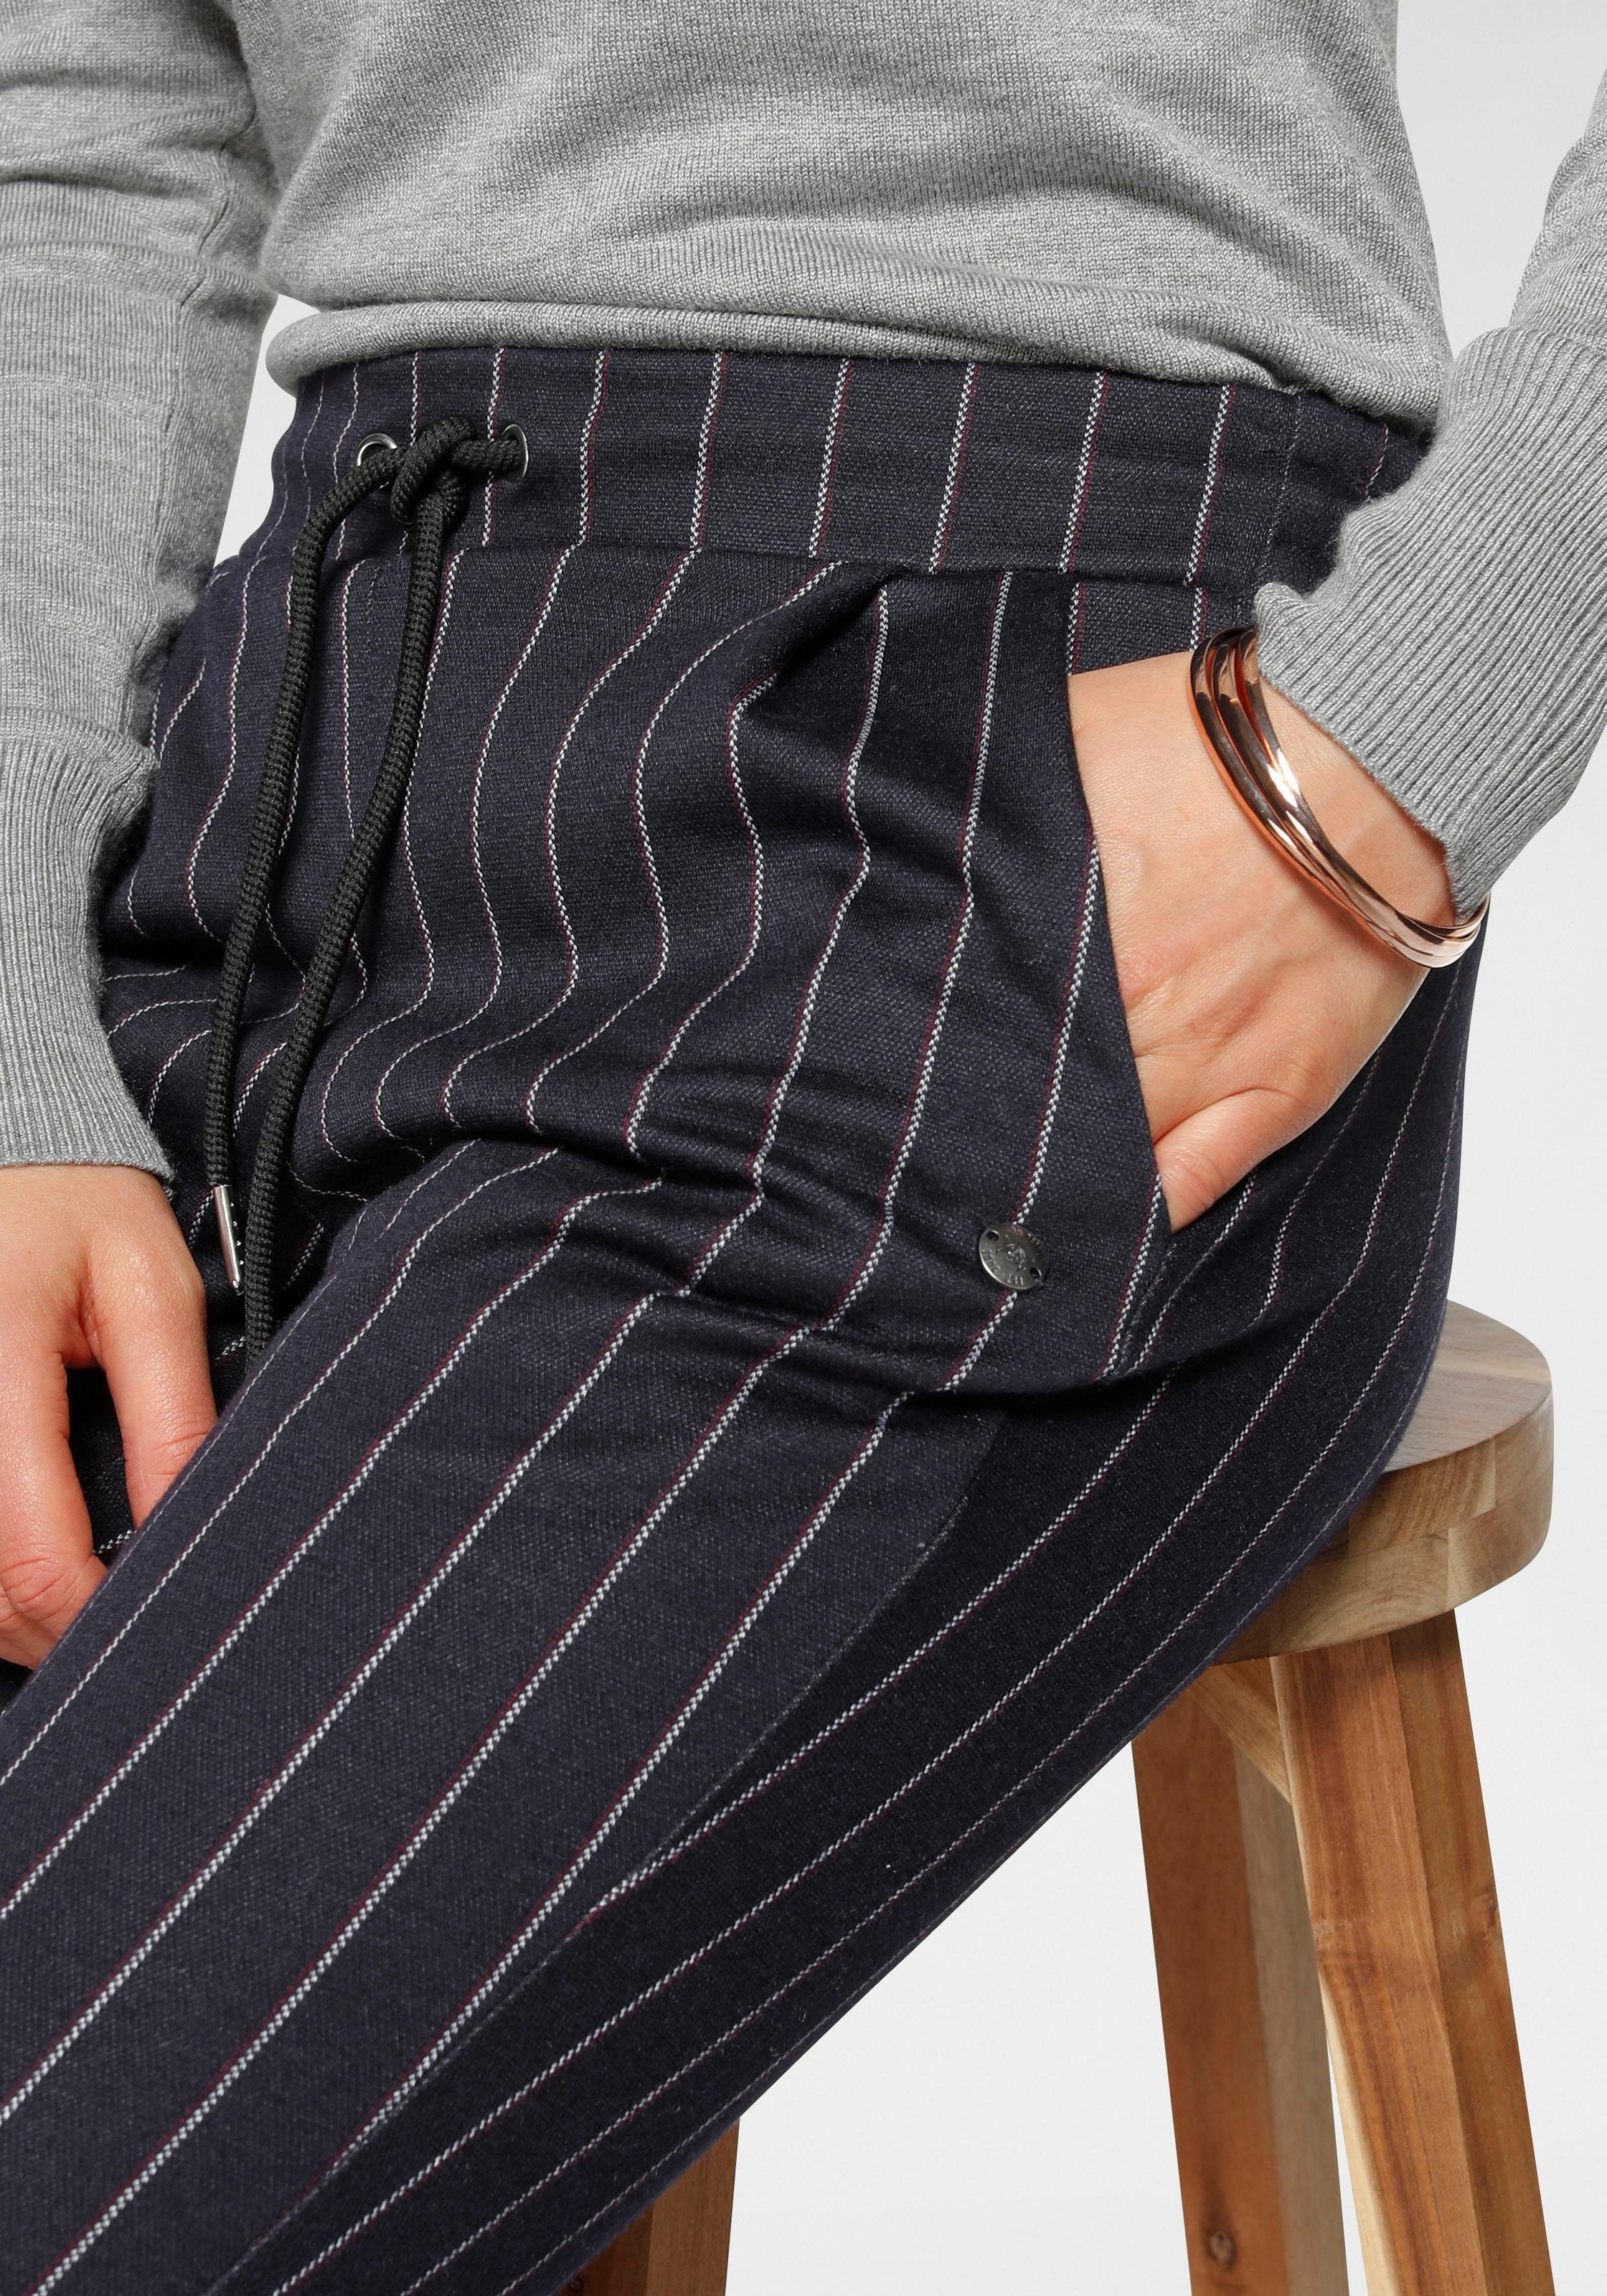 Abholzung TOM TAILOR Polo Team in bei weicher Pants, OTTOversand Jogger Qualität besonders